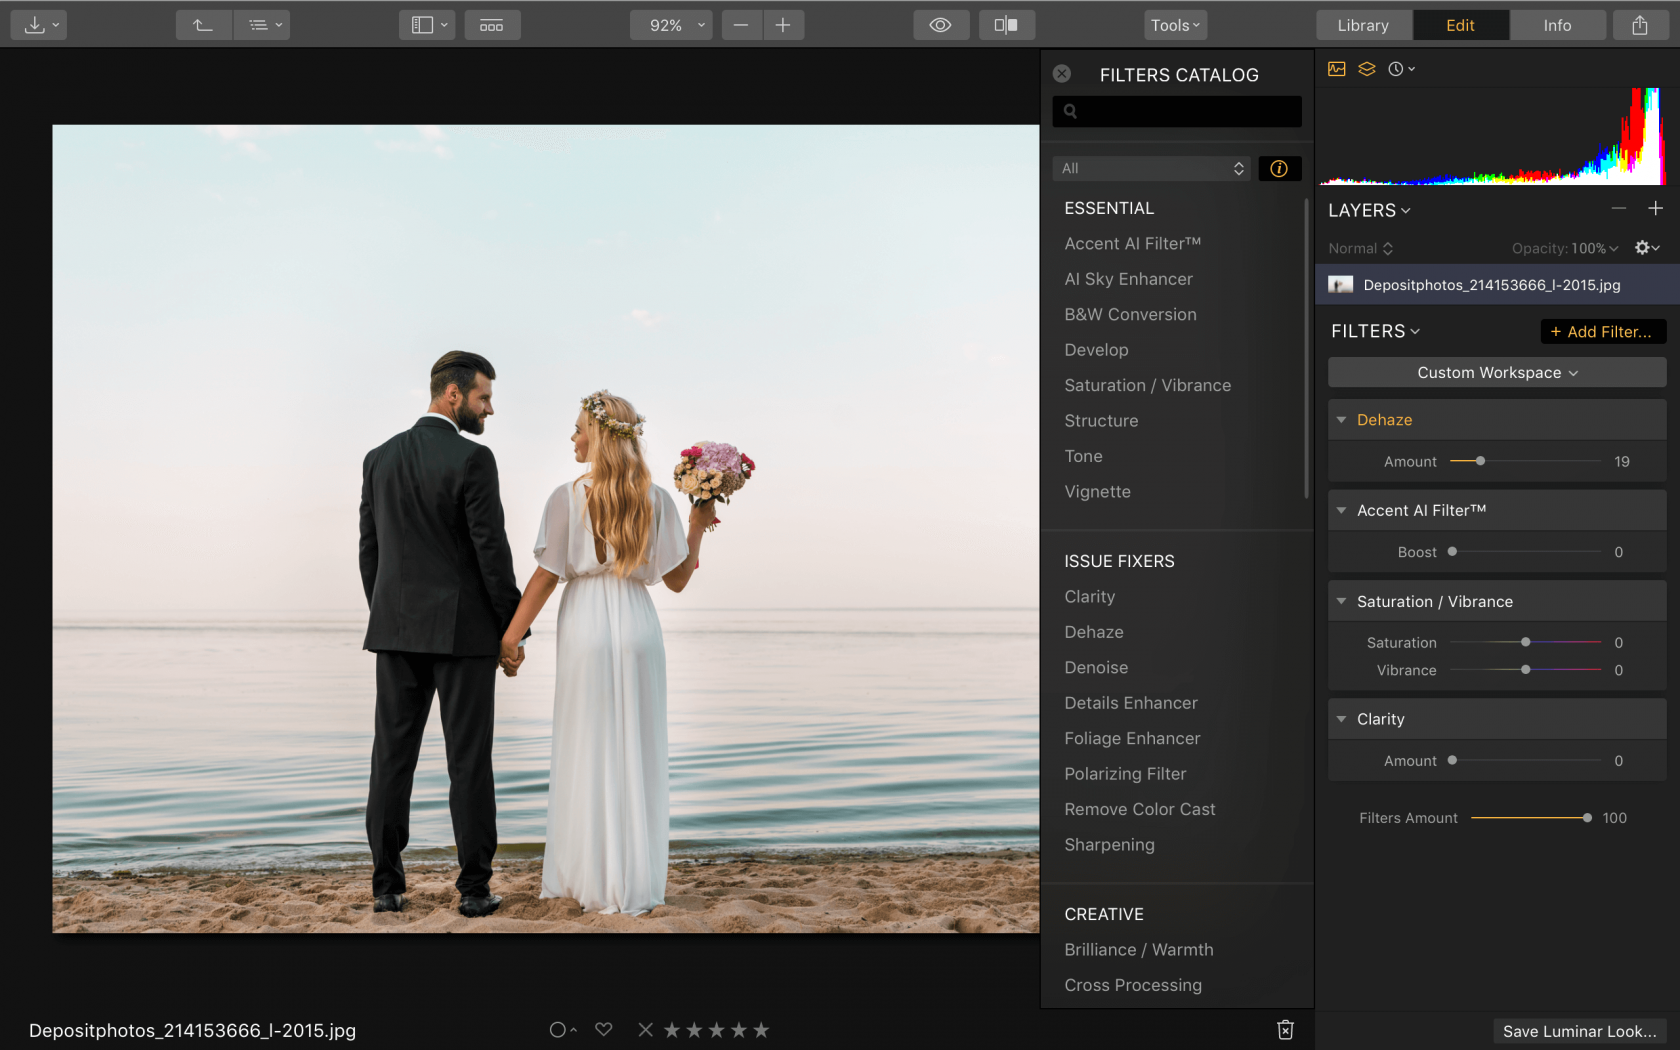 1. Organize, edit, and view all your weddings photos in one place